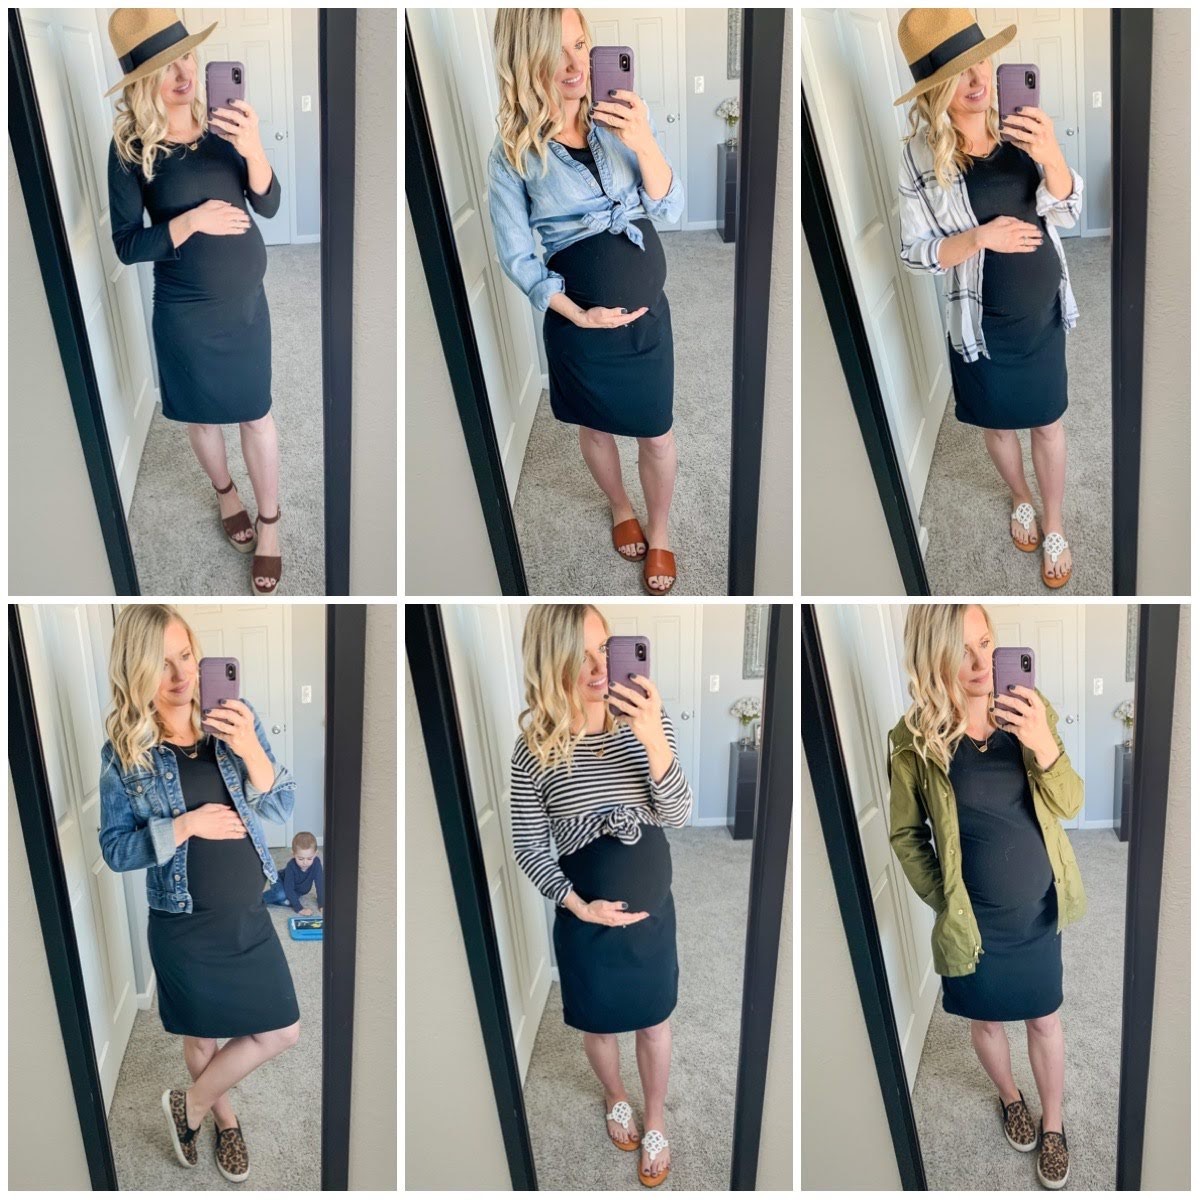 10+ Quick Tips to Help You Find the Best Pregnancy Outfit Ideas